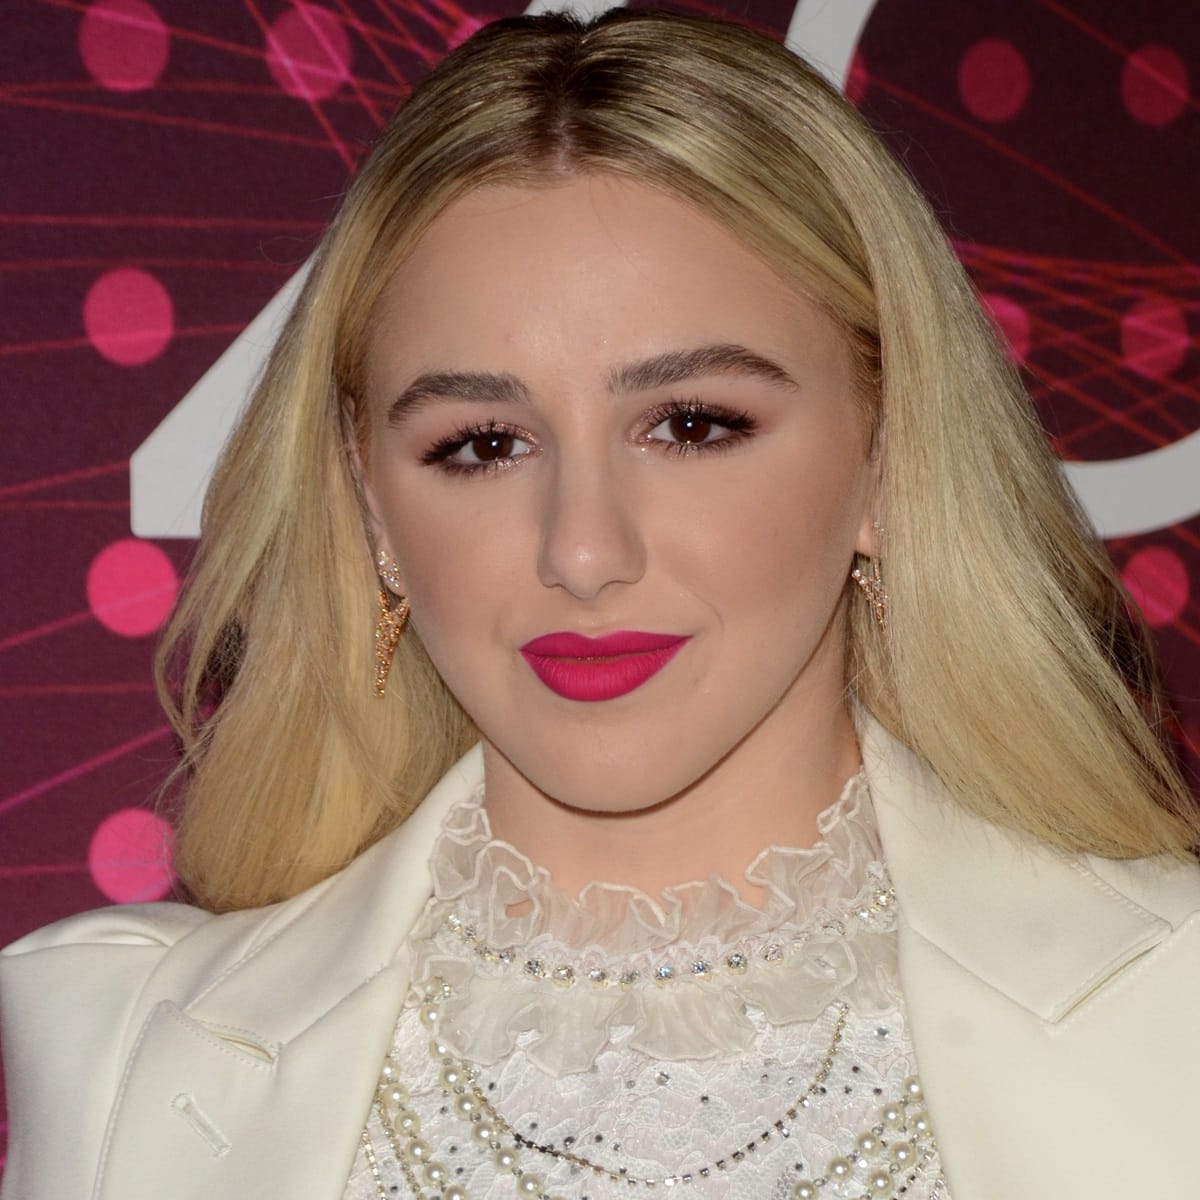 Chloe Lukasiak has a medical condition called silent sinus syndrome that causes one side of her face to appear different from the other